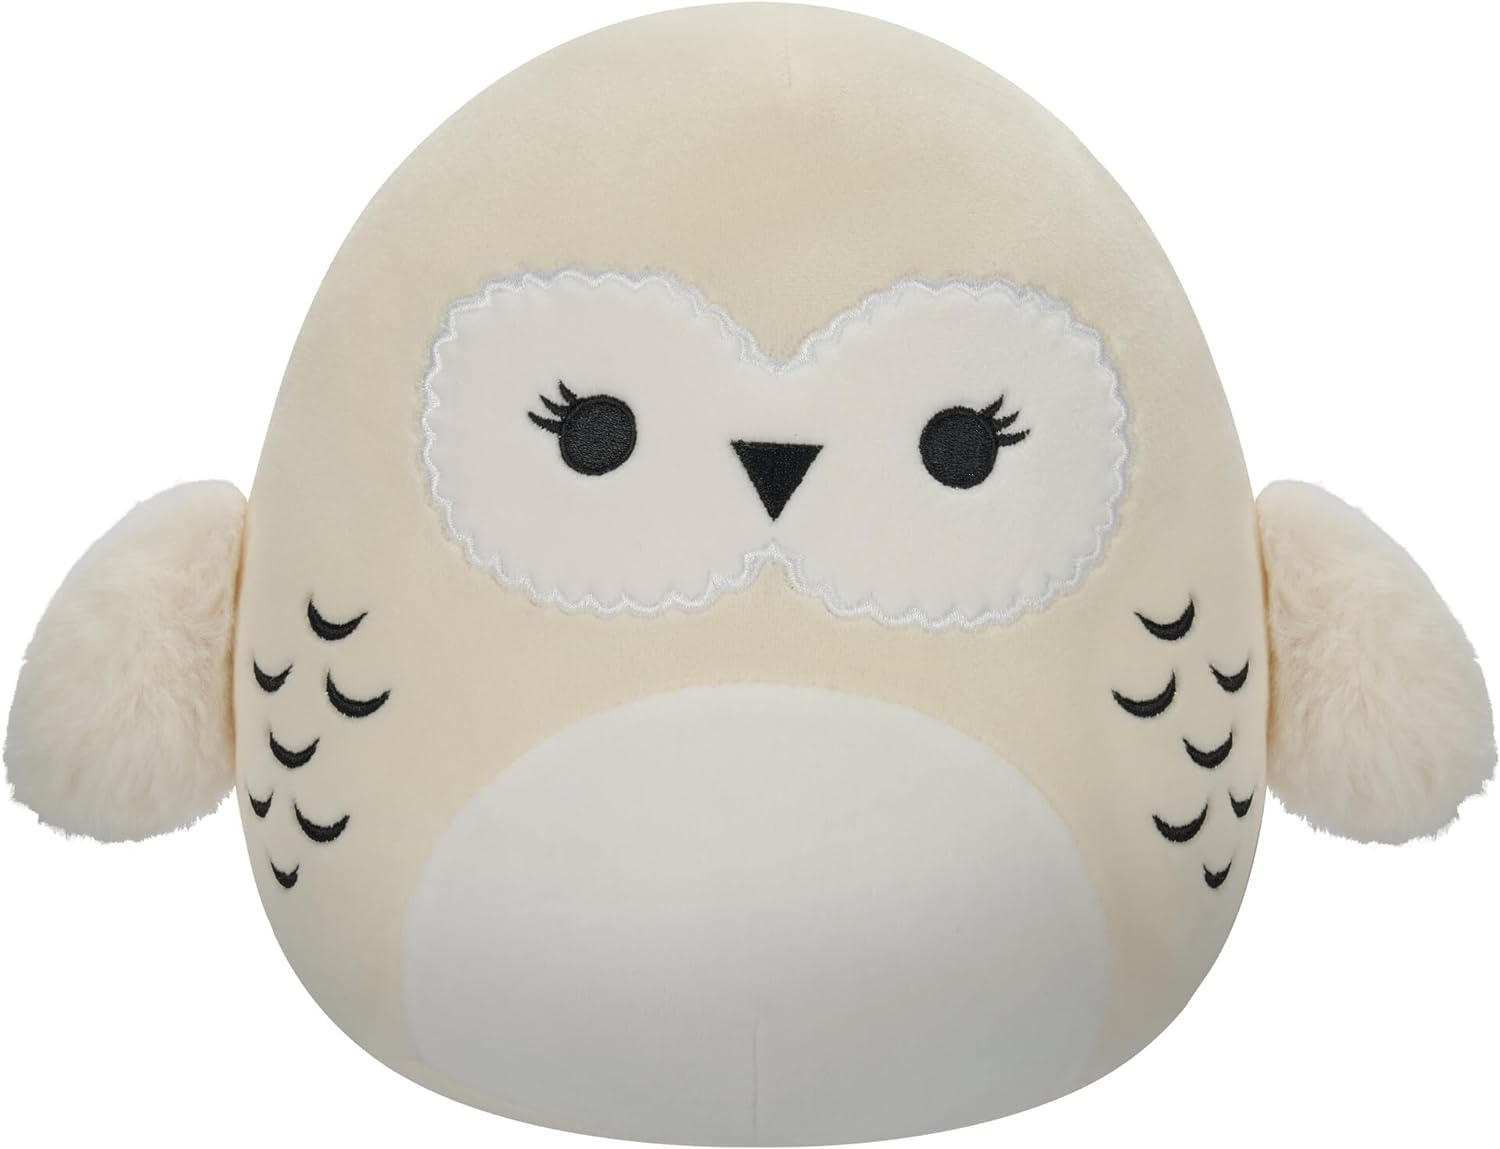 Squishmallows Harry Potter 10-Inch plushes Harry Potter, Ron Weasley,  Hermione Granger and Hedwig 